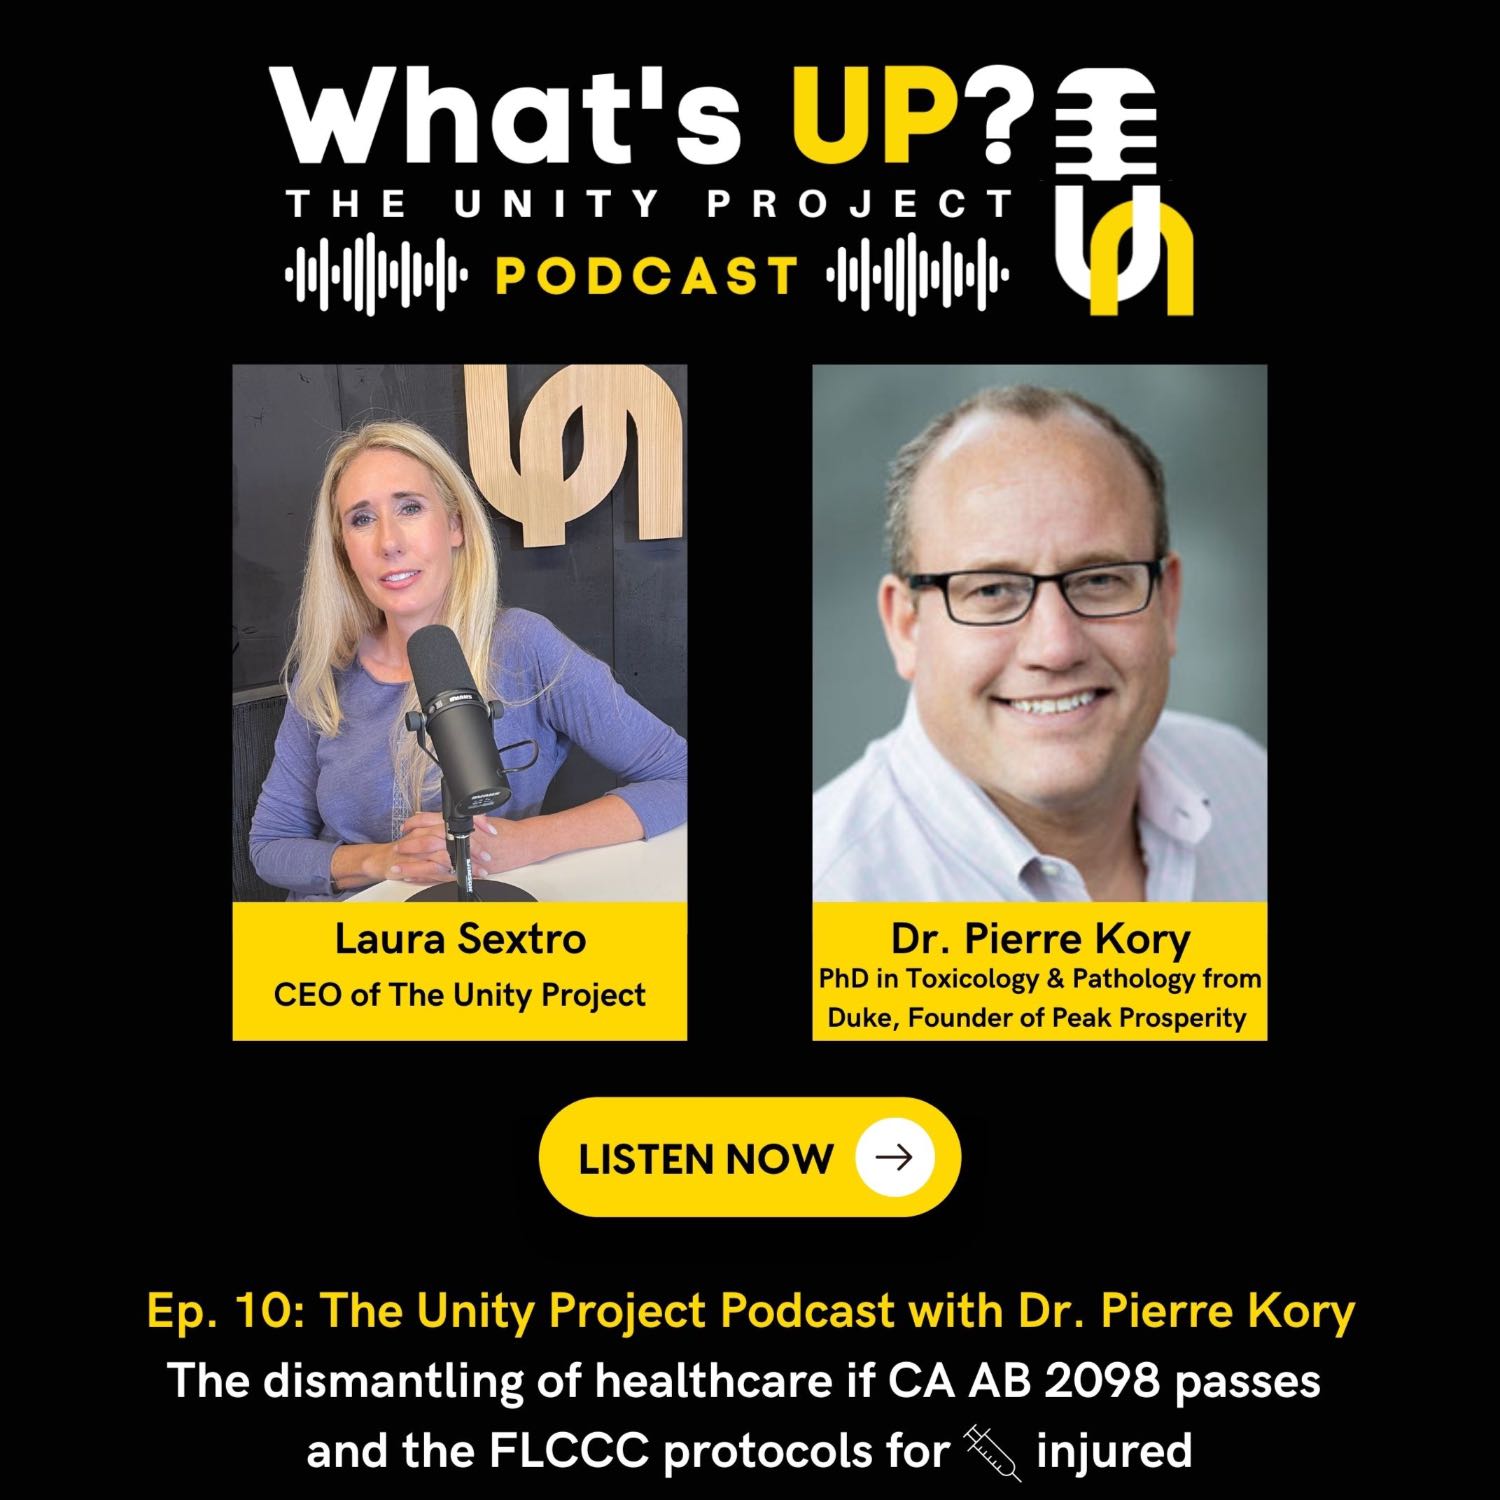 Ep. 10: Unity Project Podcast w/ Dr. Pierre Kory: The dismantling of healthcare if CA AB 2098 passes and the FLCCC protocols for vax injured